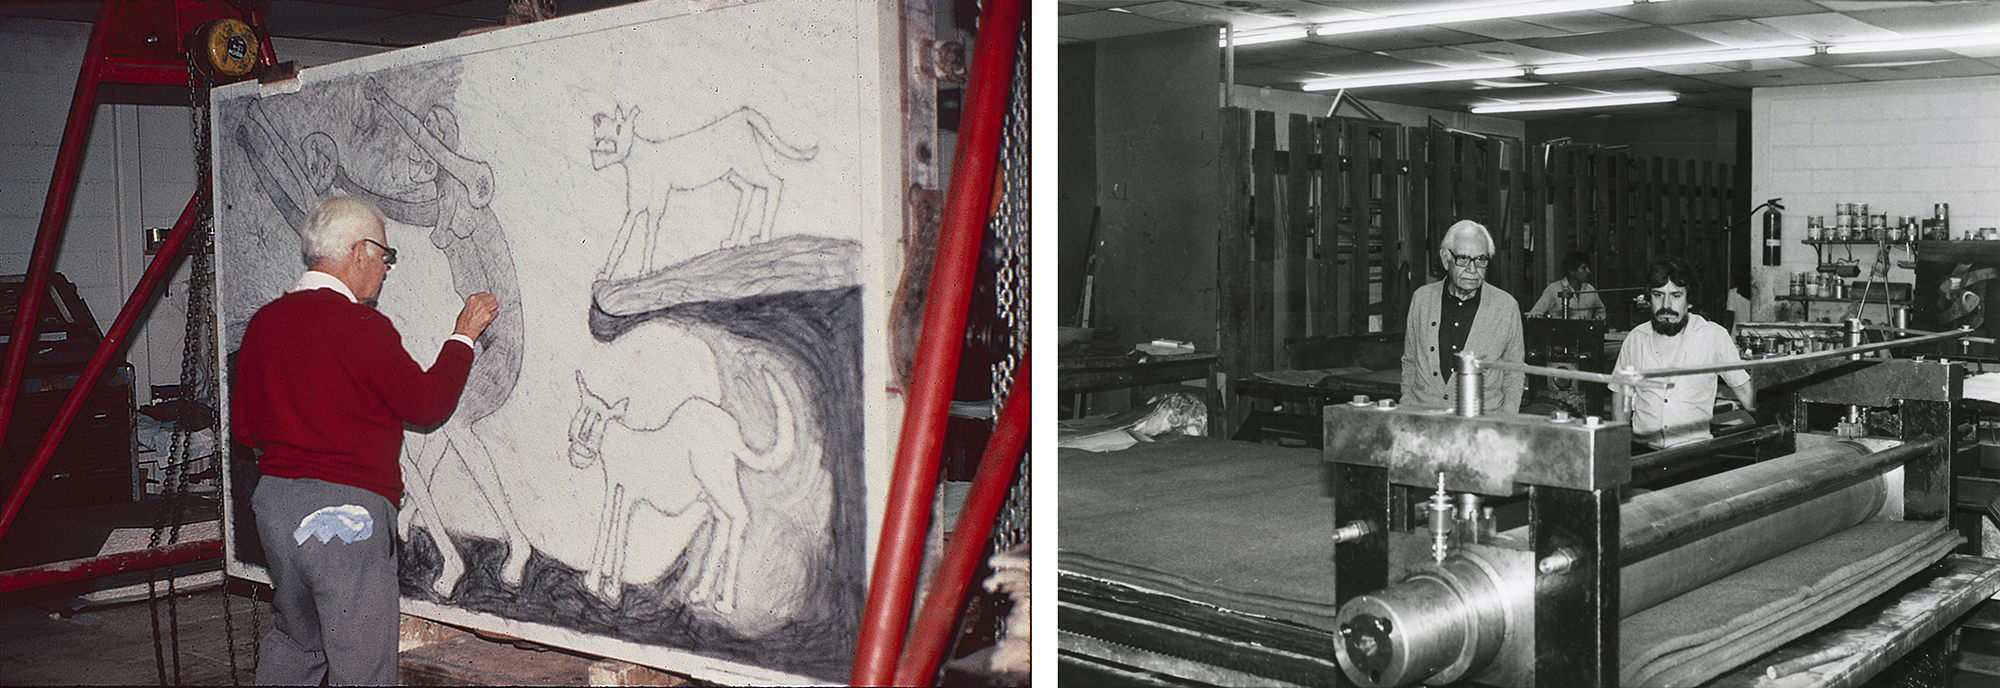 Left: Tamayo and the lithographic stone, art © 2020 Tamayo Heirs/Mexico/Artists Rights Society (ARS), New York, photo © Shaye Remba, courtesy of Mixografía®; Right: The printing press at Taller Gráfia Mexicana, photo © Shaye Remba, courtesy of Mixografía®